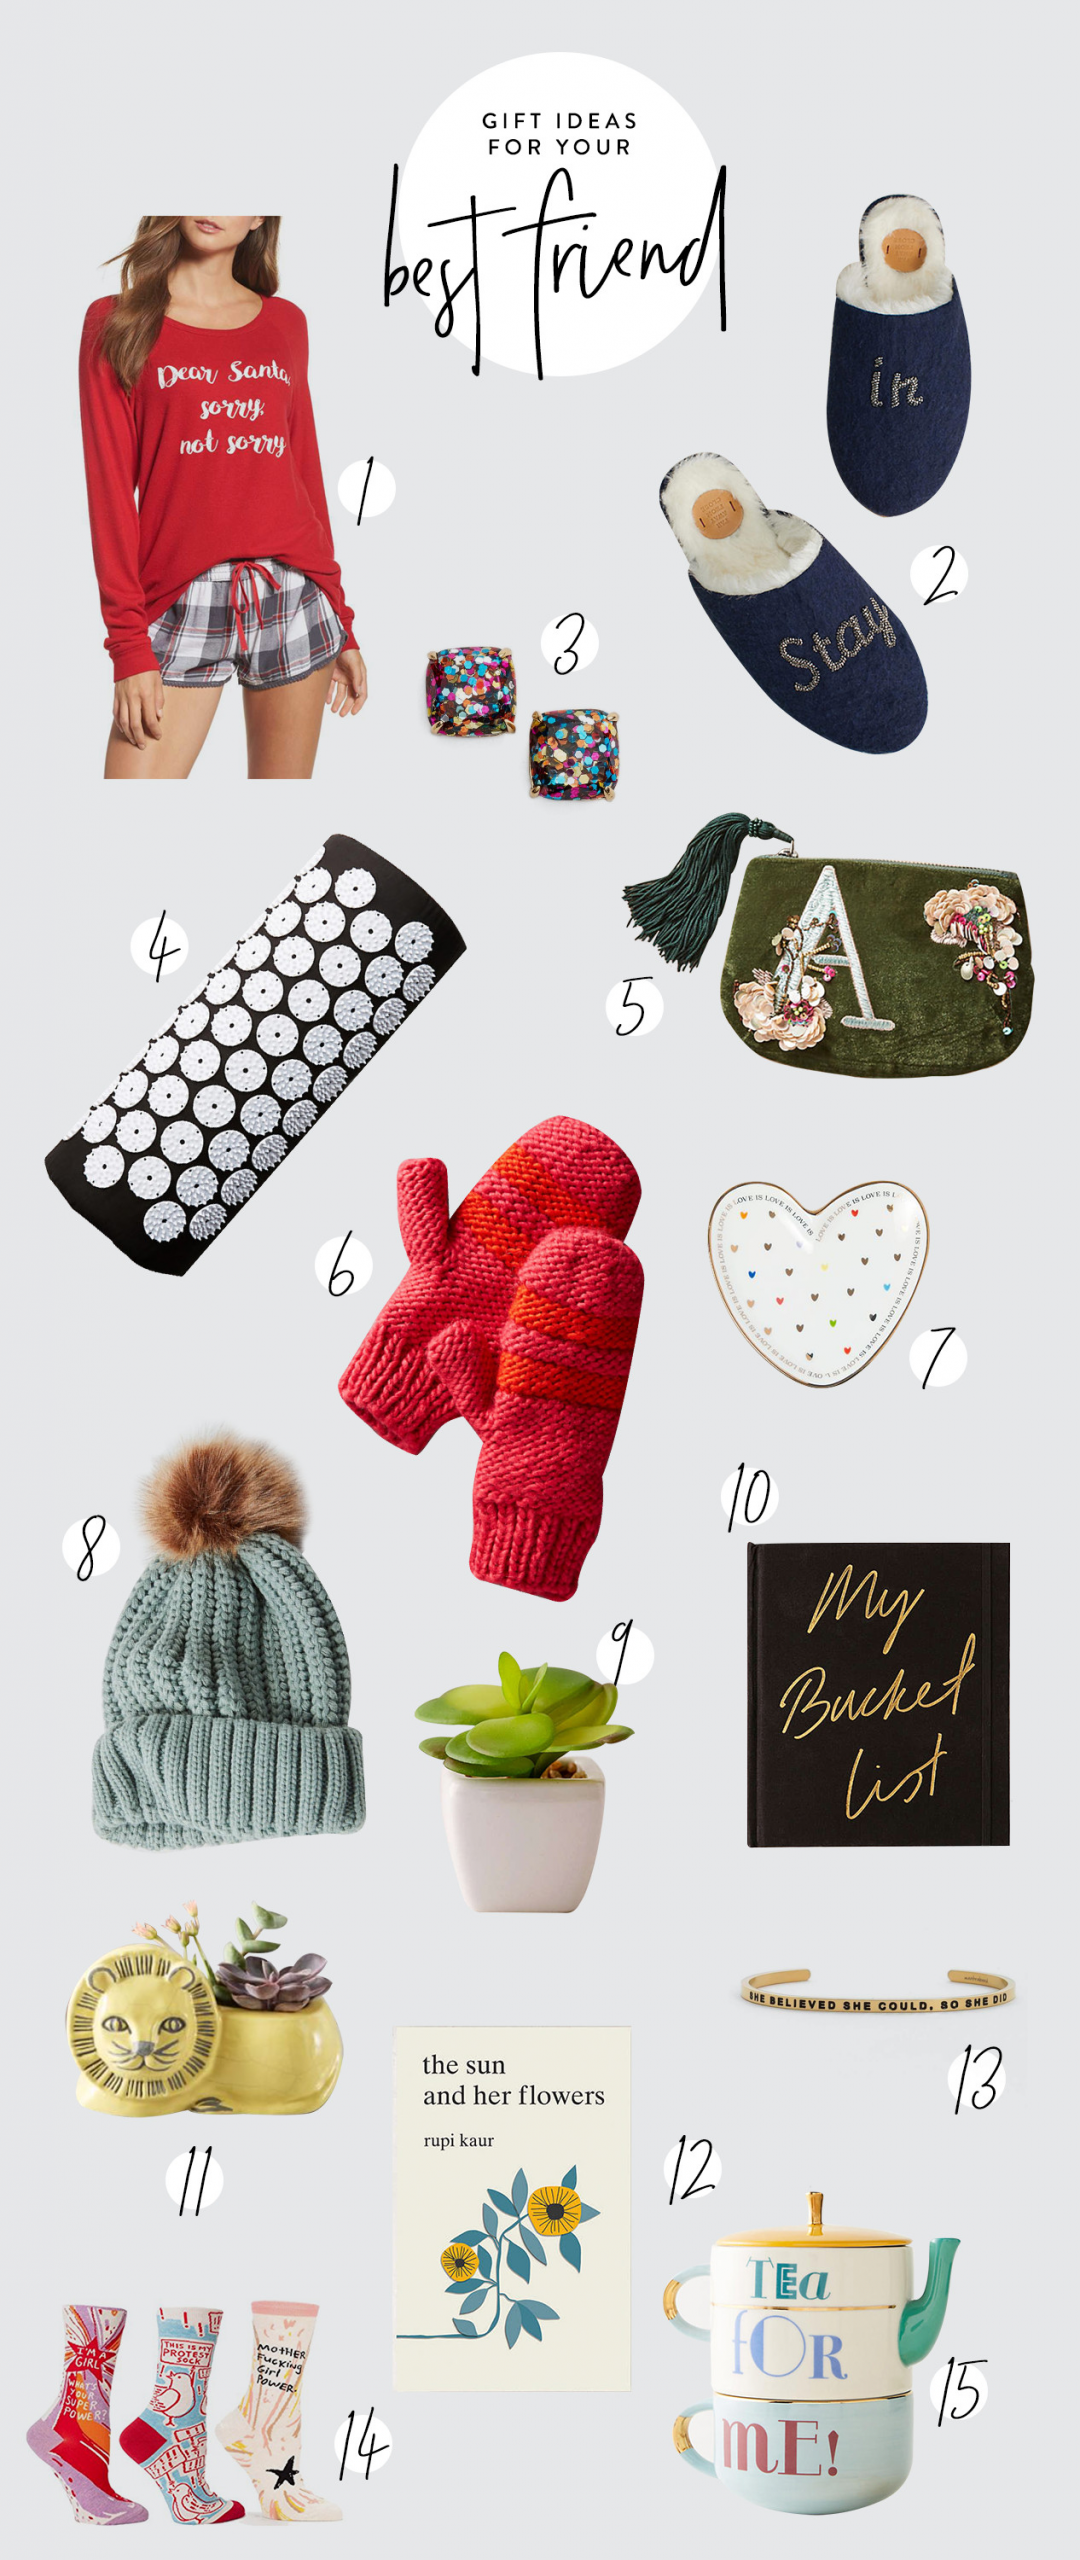 Best Friends Gift Ideas
 The Ultimate Guide for Holiday Gift Ideas